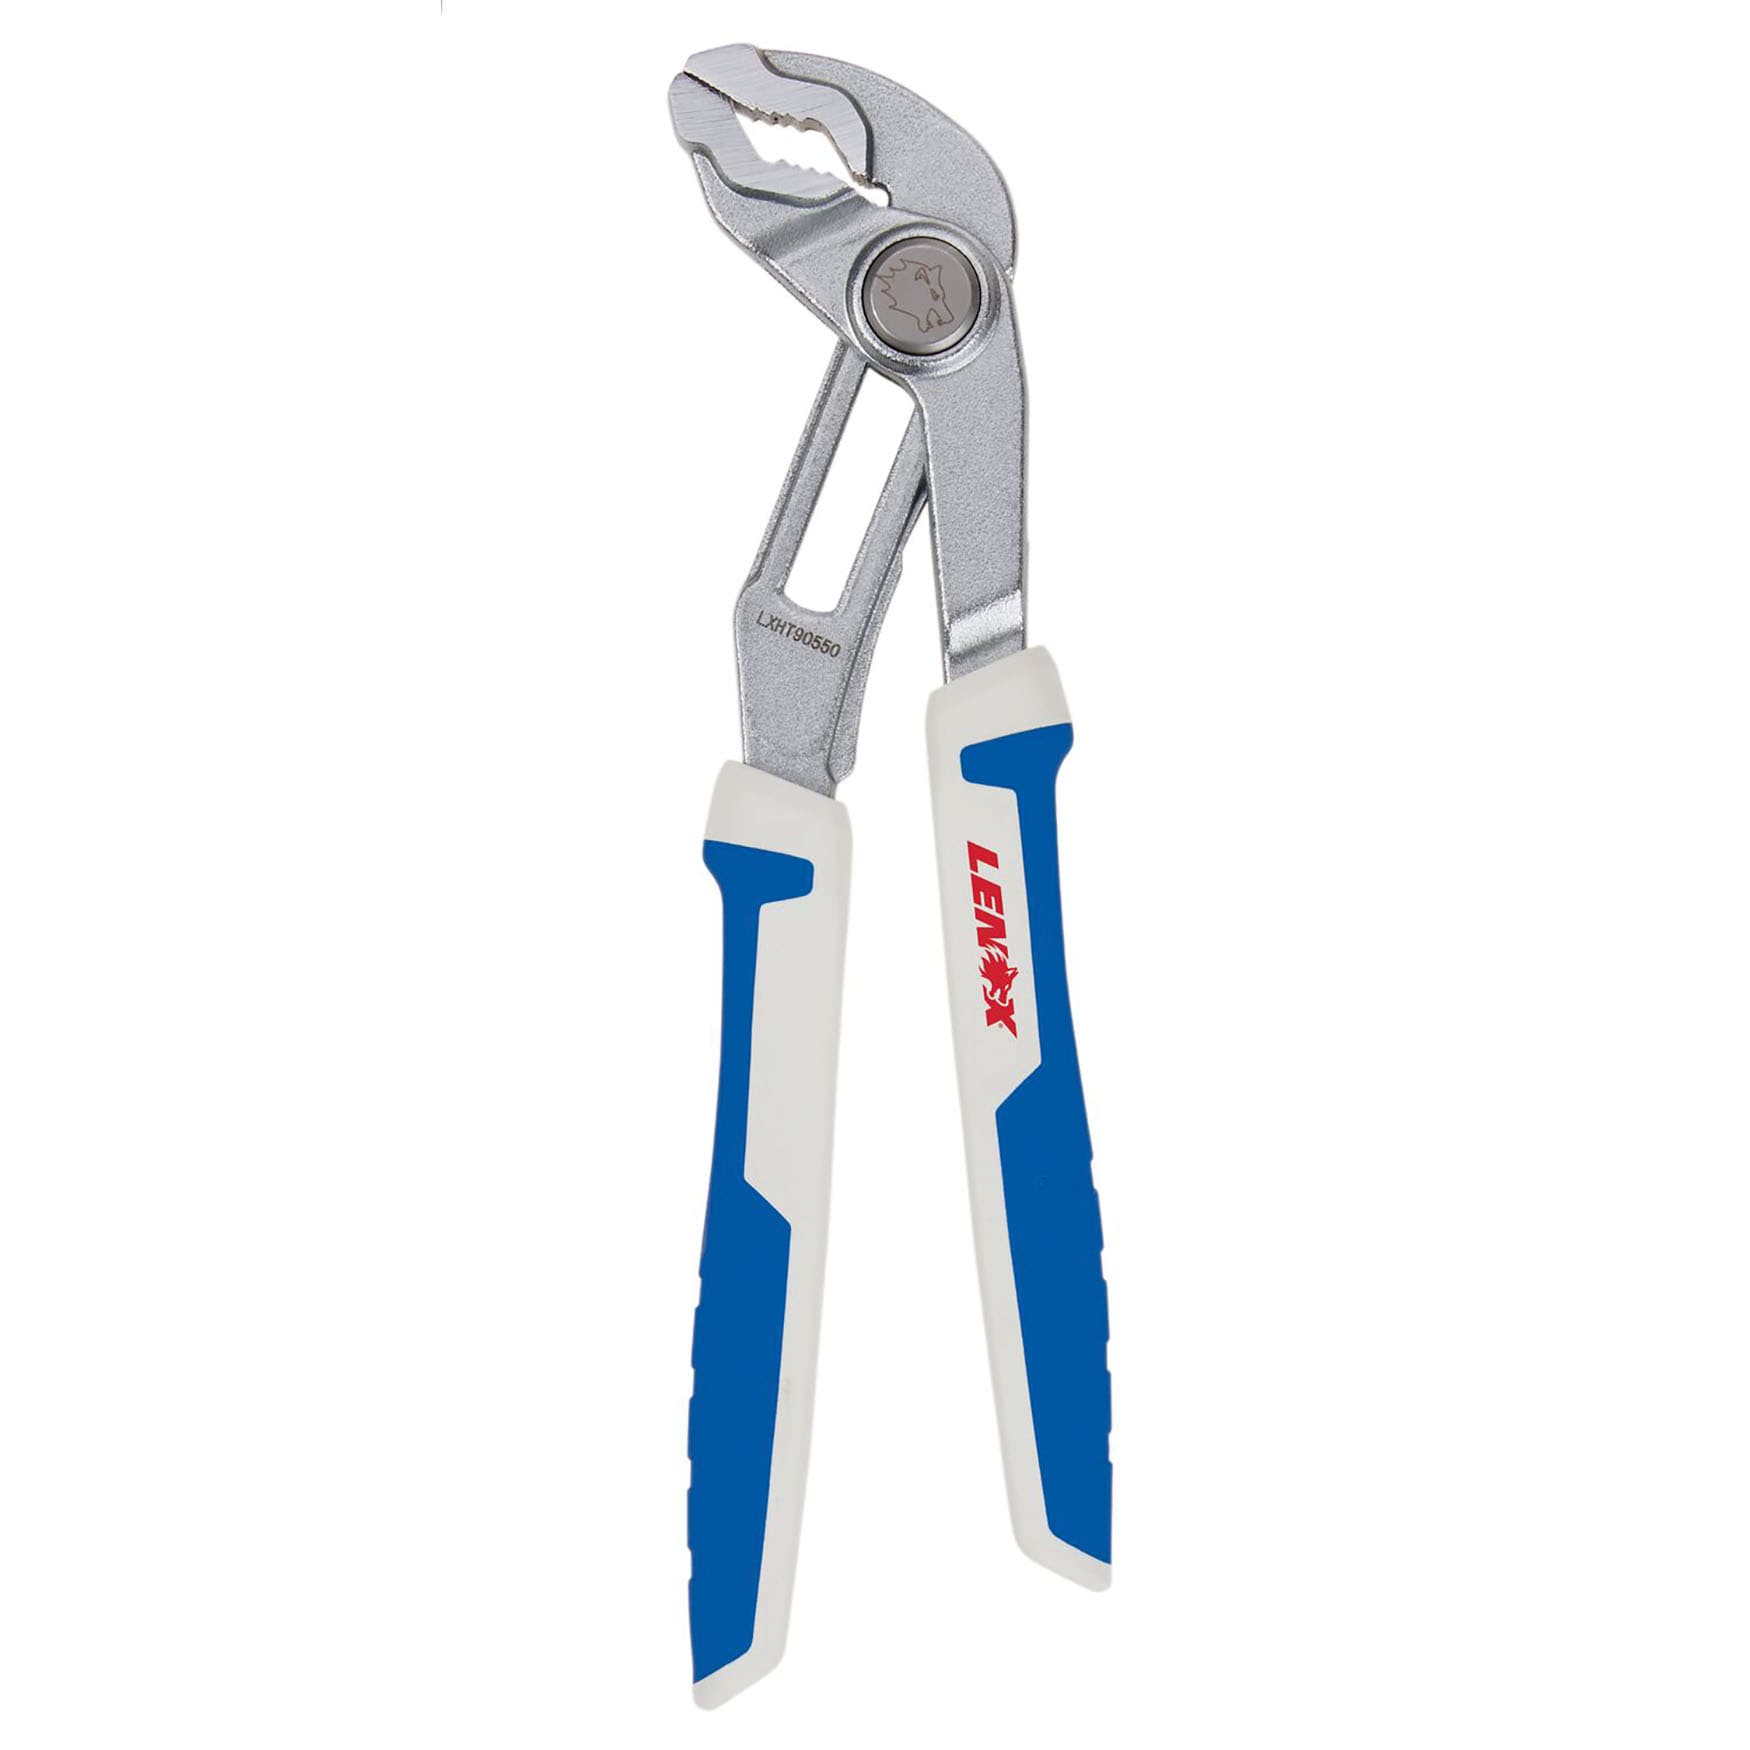 LENOX Quick Adjust 8-in Plumbing Tongue and Groove Pliers in the